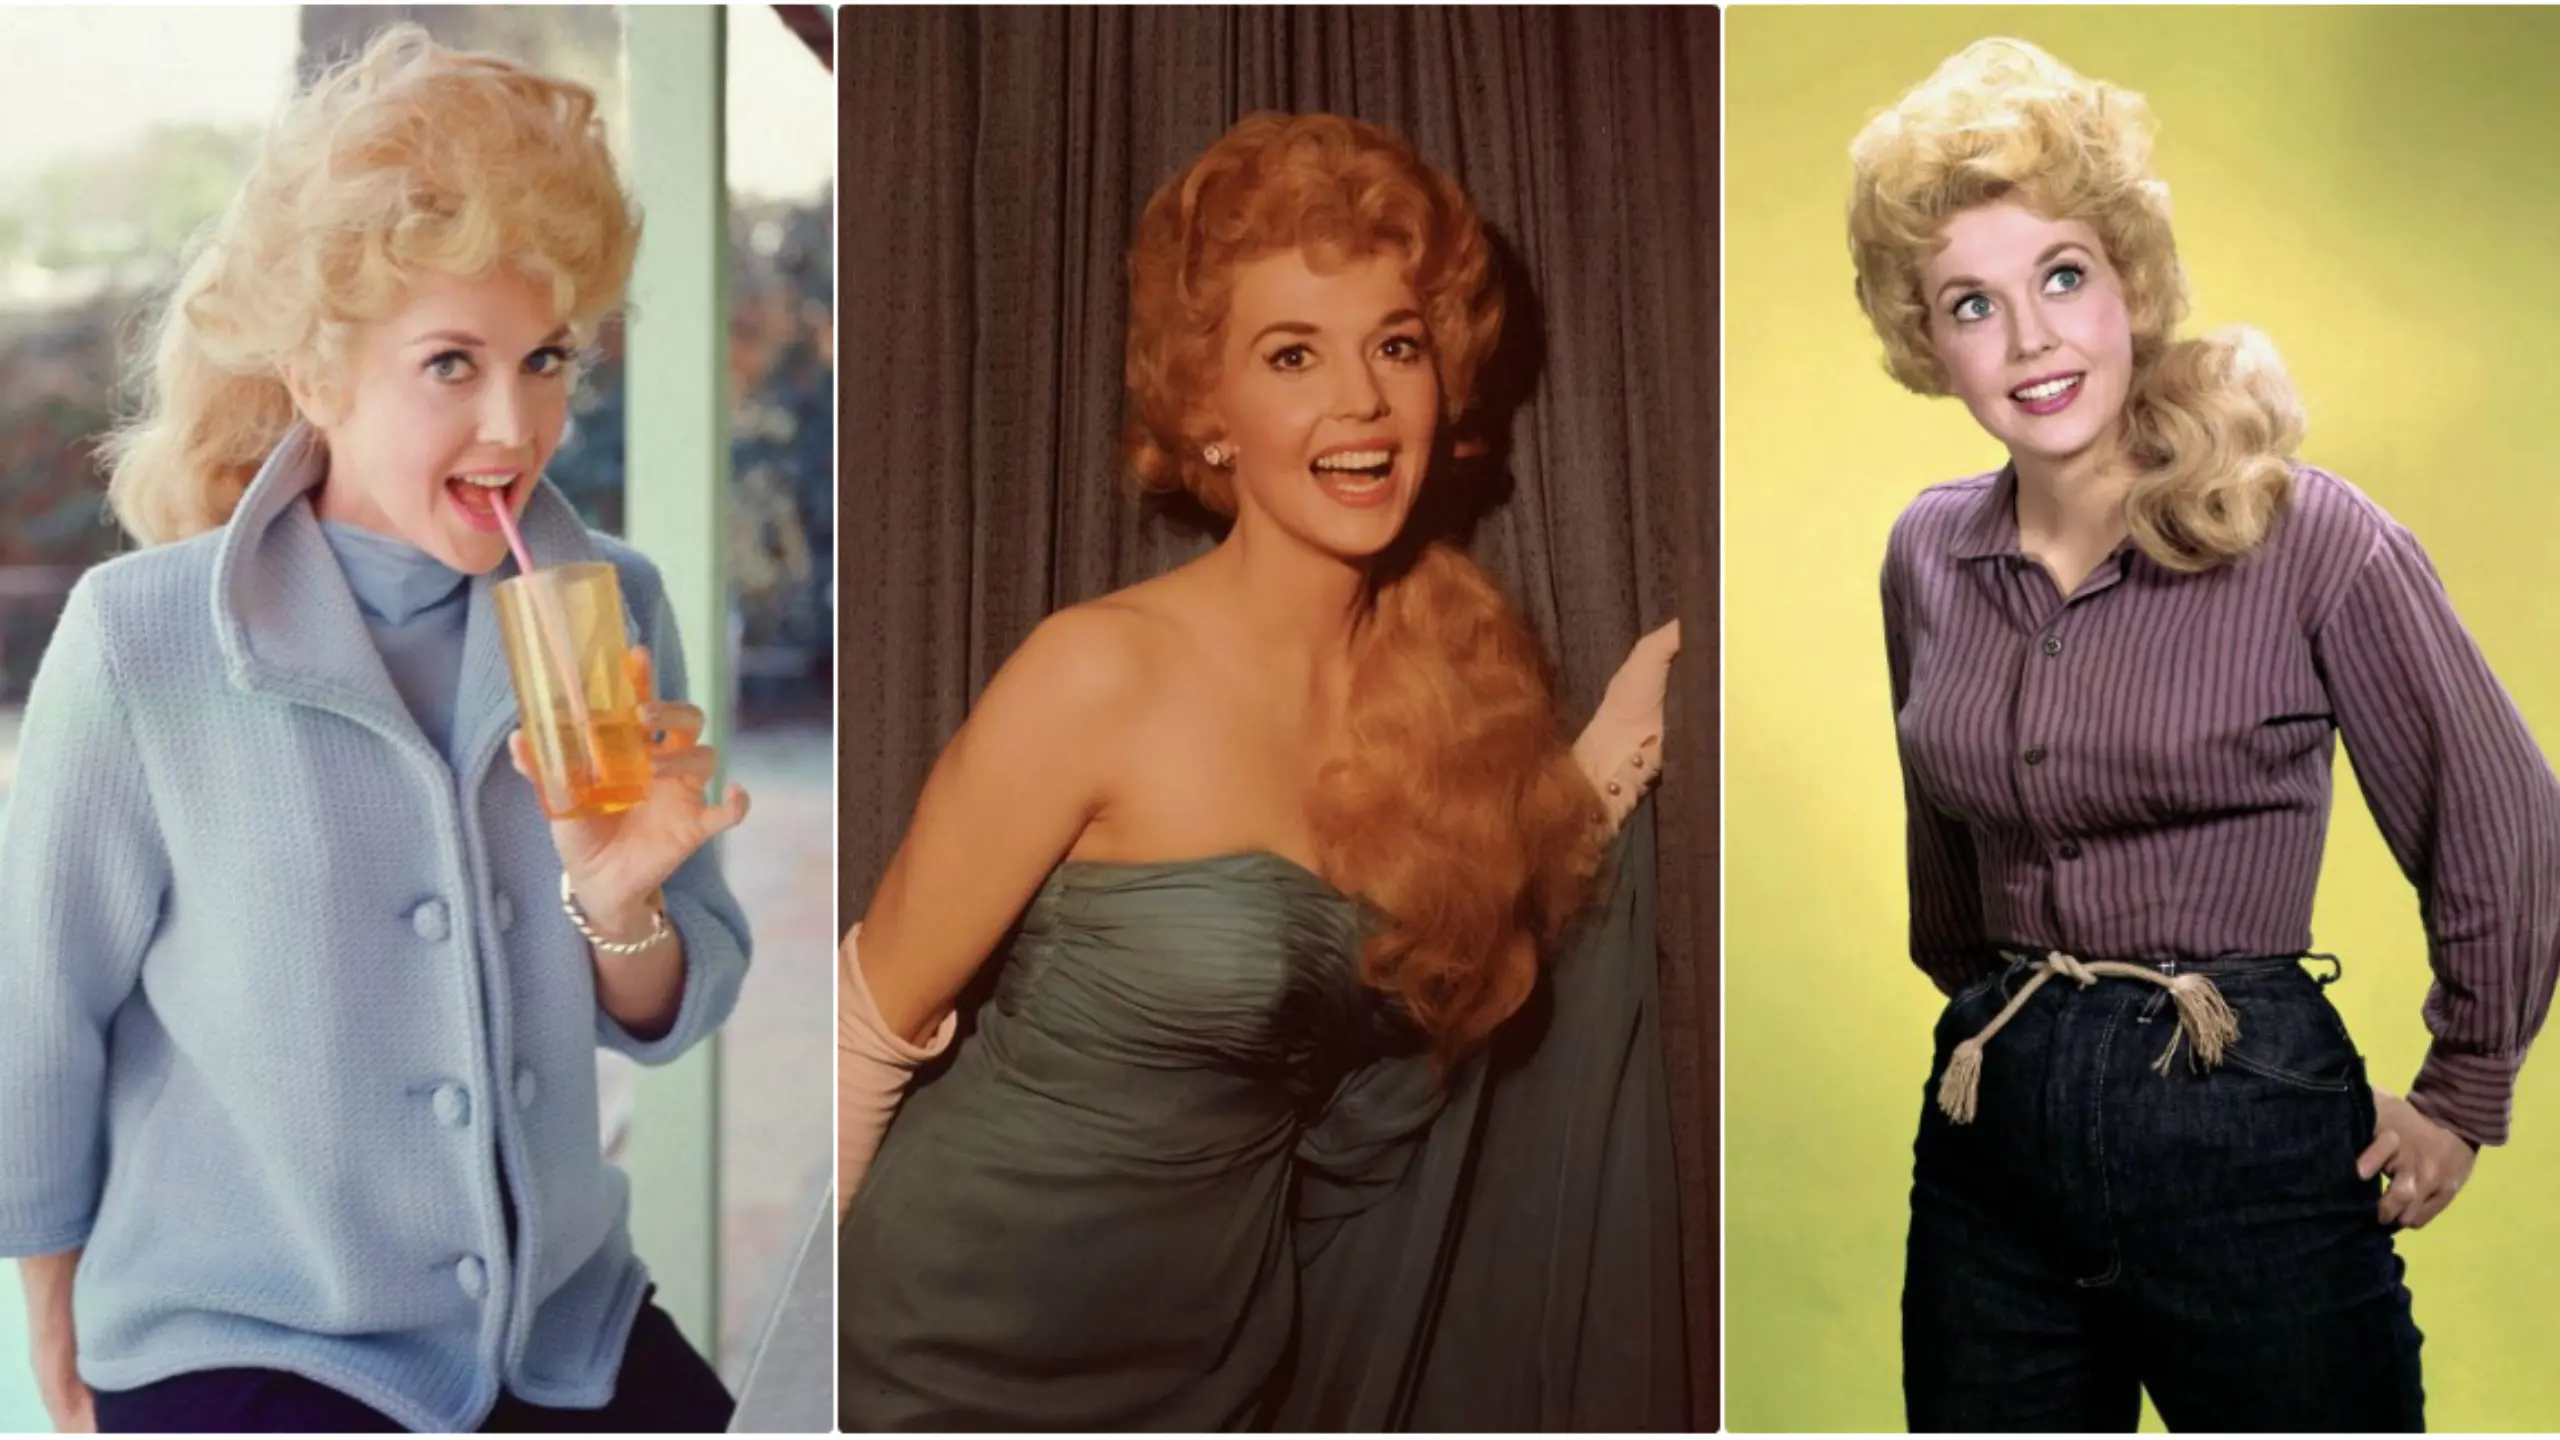 Donna Douglas The Talented Actress from the 1960s